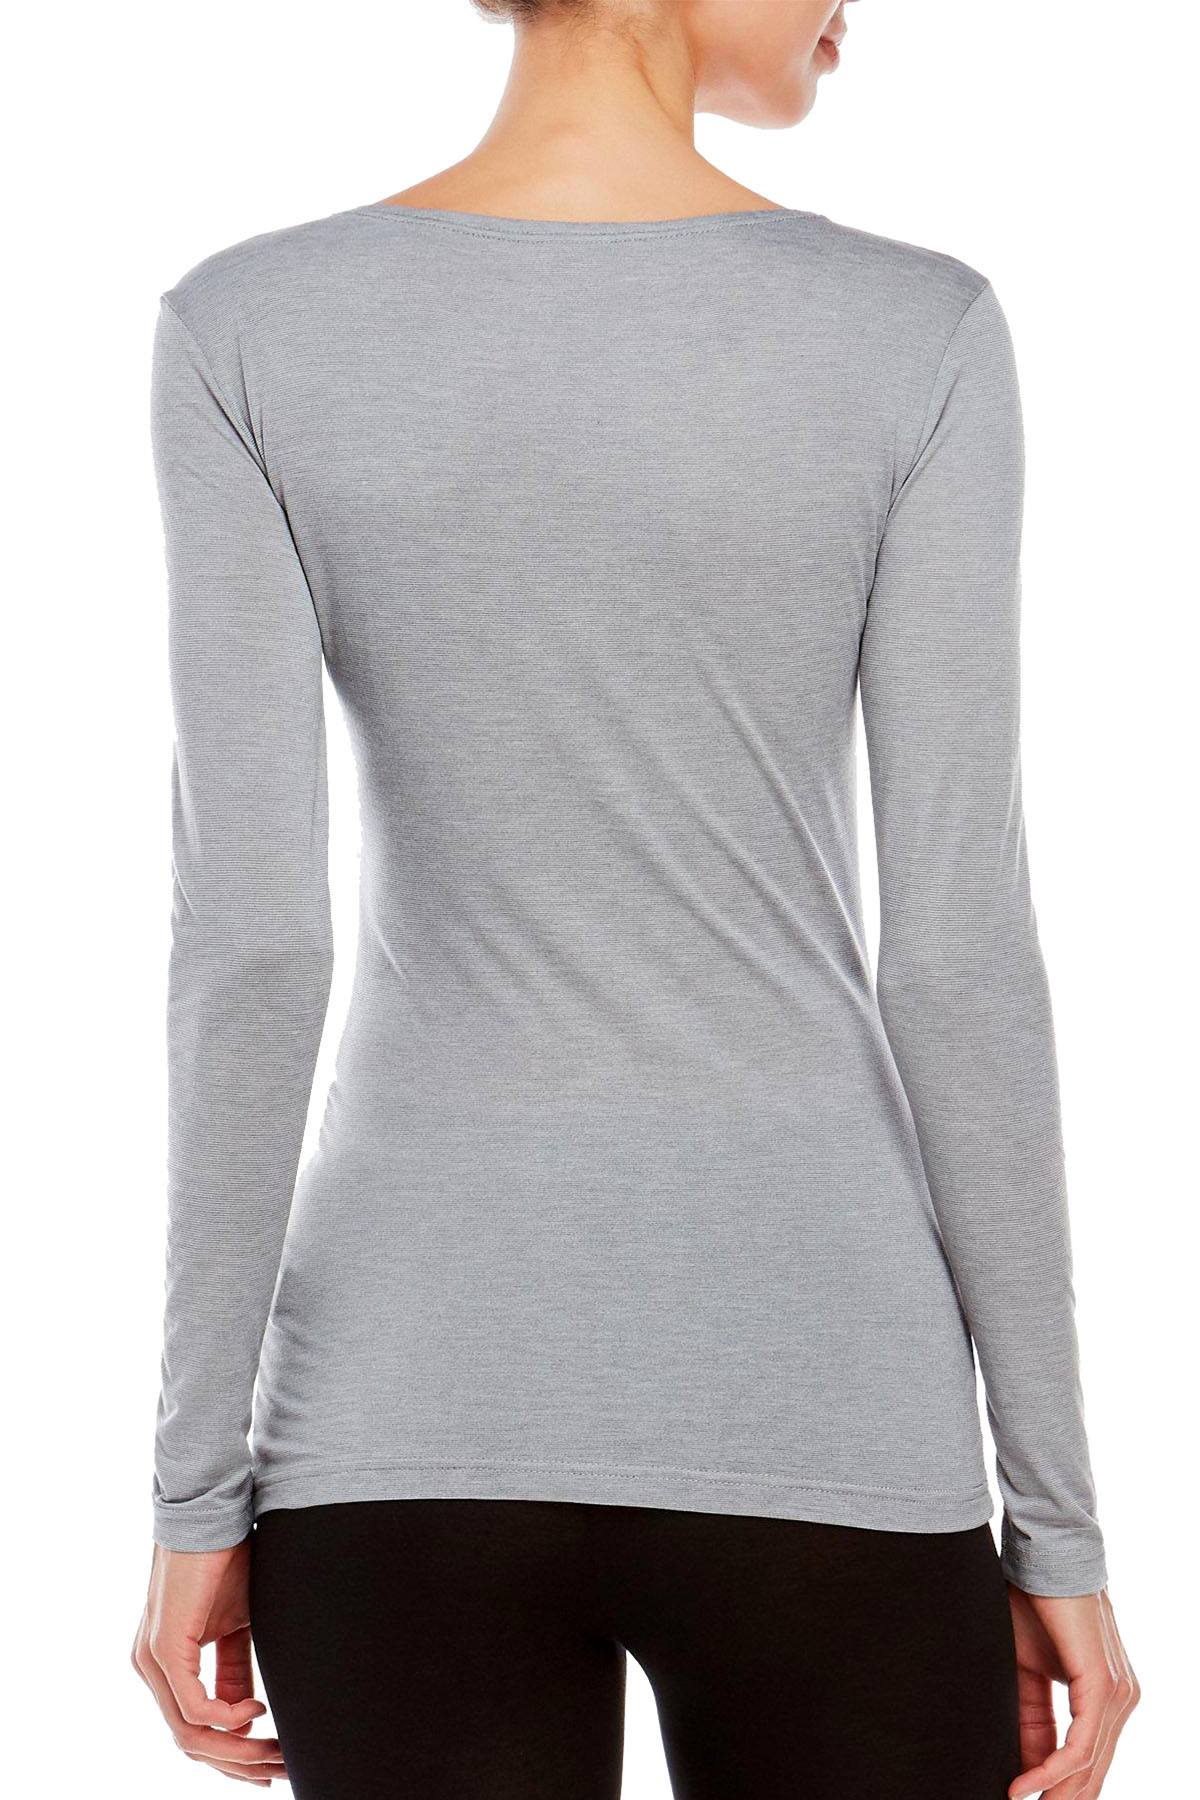 32 Degrees Heather-Grey Long-Sleeve Base-Layer Top